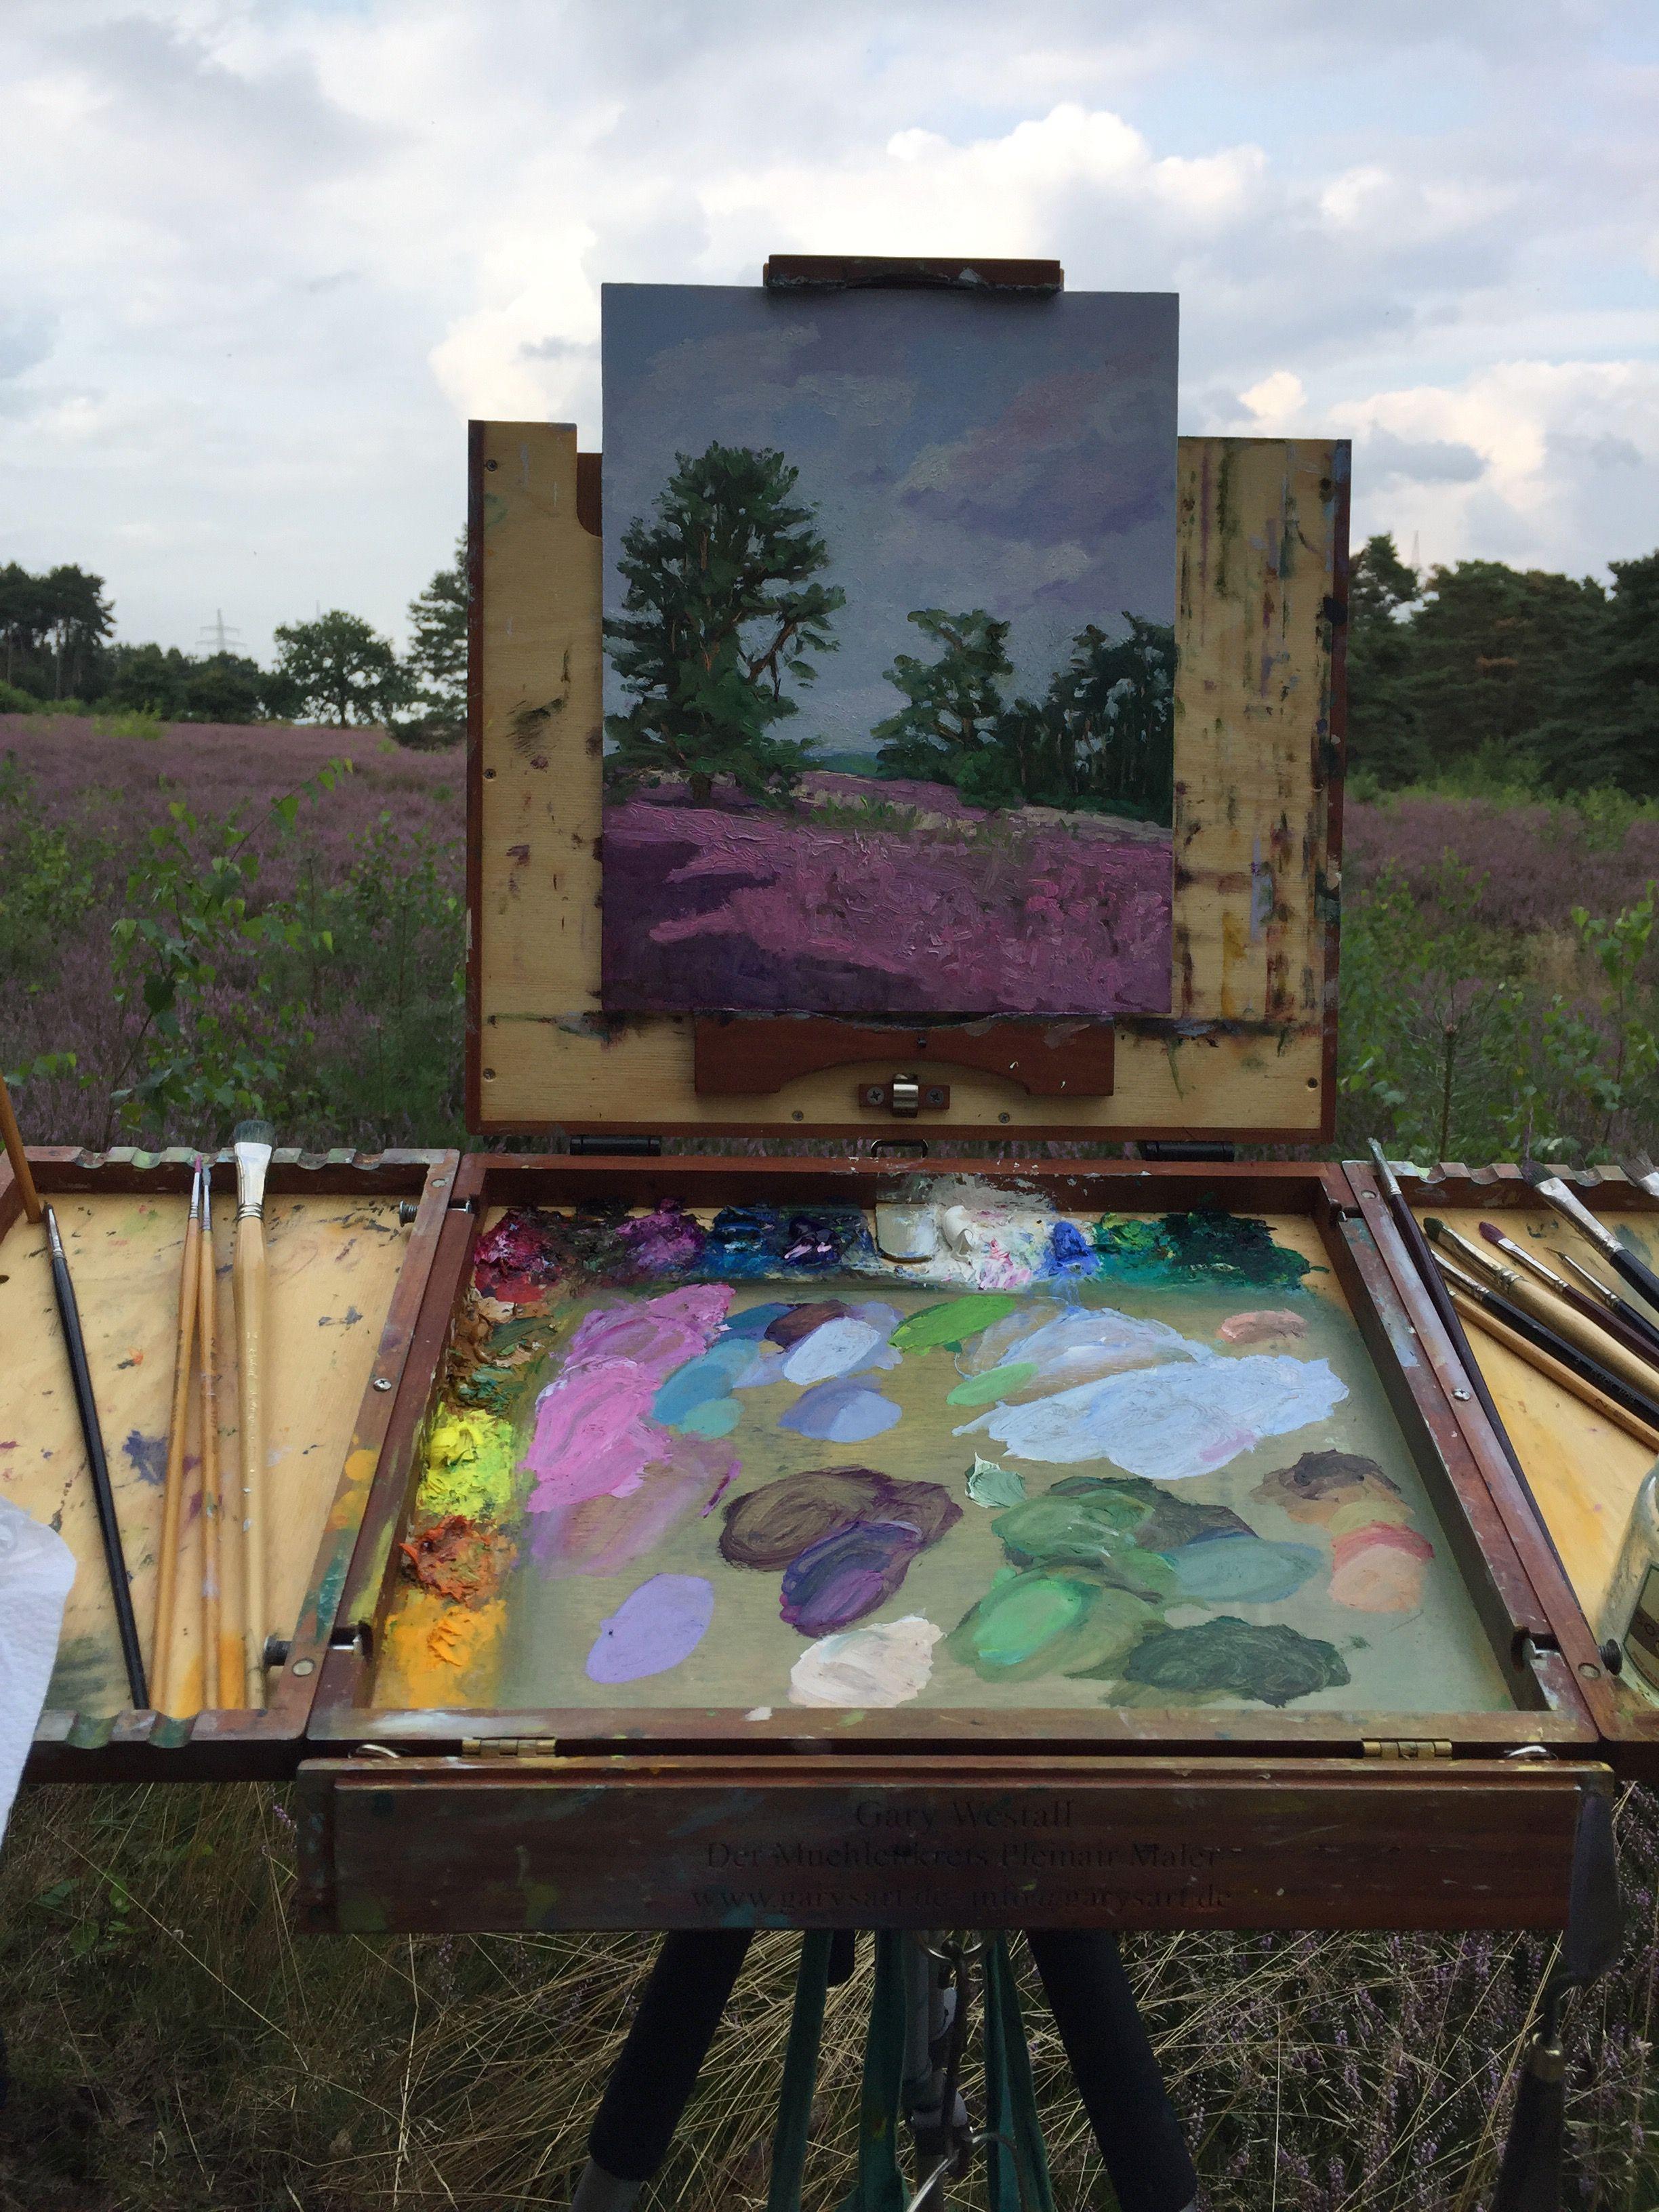 In the Kirchdorfer Heath Plein air painting again. The Heather was in full blossom and the sweet honey smell was fantastic. Every sense was satisfied, such a joyful place to paint.    Oil on HDF   24x30cm :: Painting :: Impressionist :: This piece